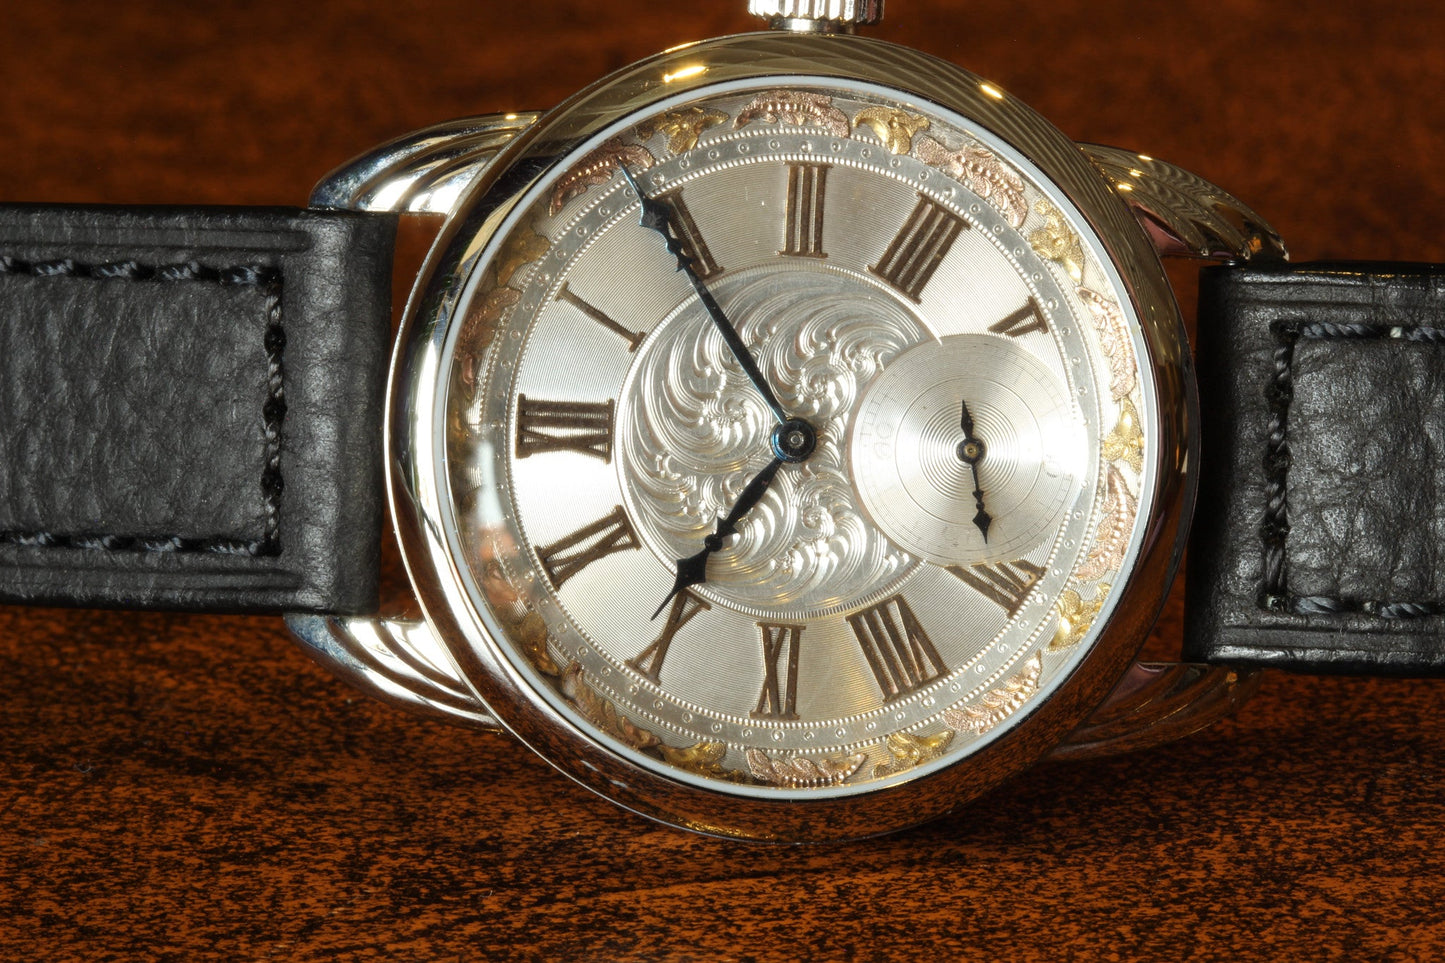 RPaige Wrocket hand engraved Silver & Gold dial watch